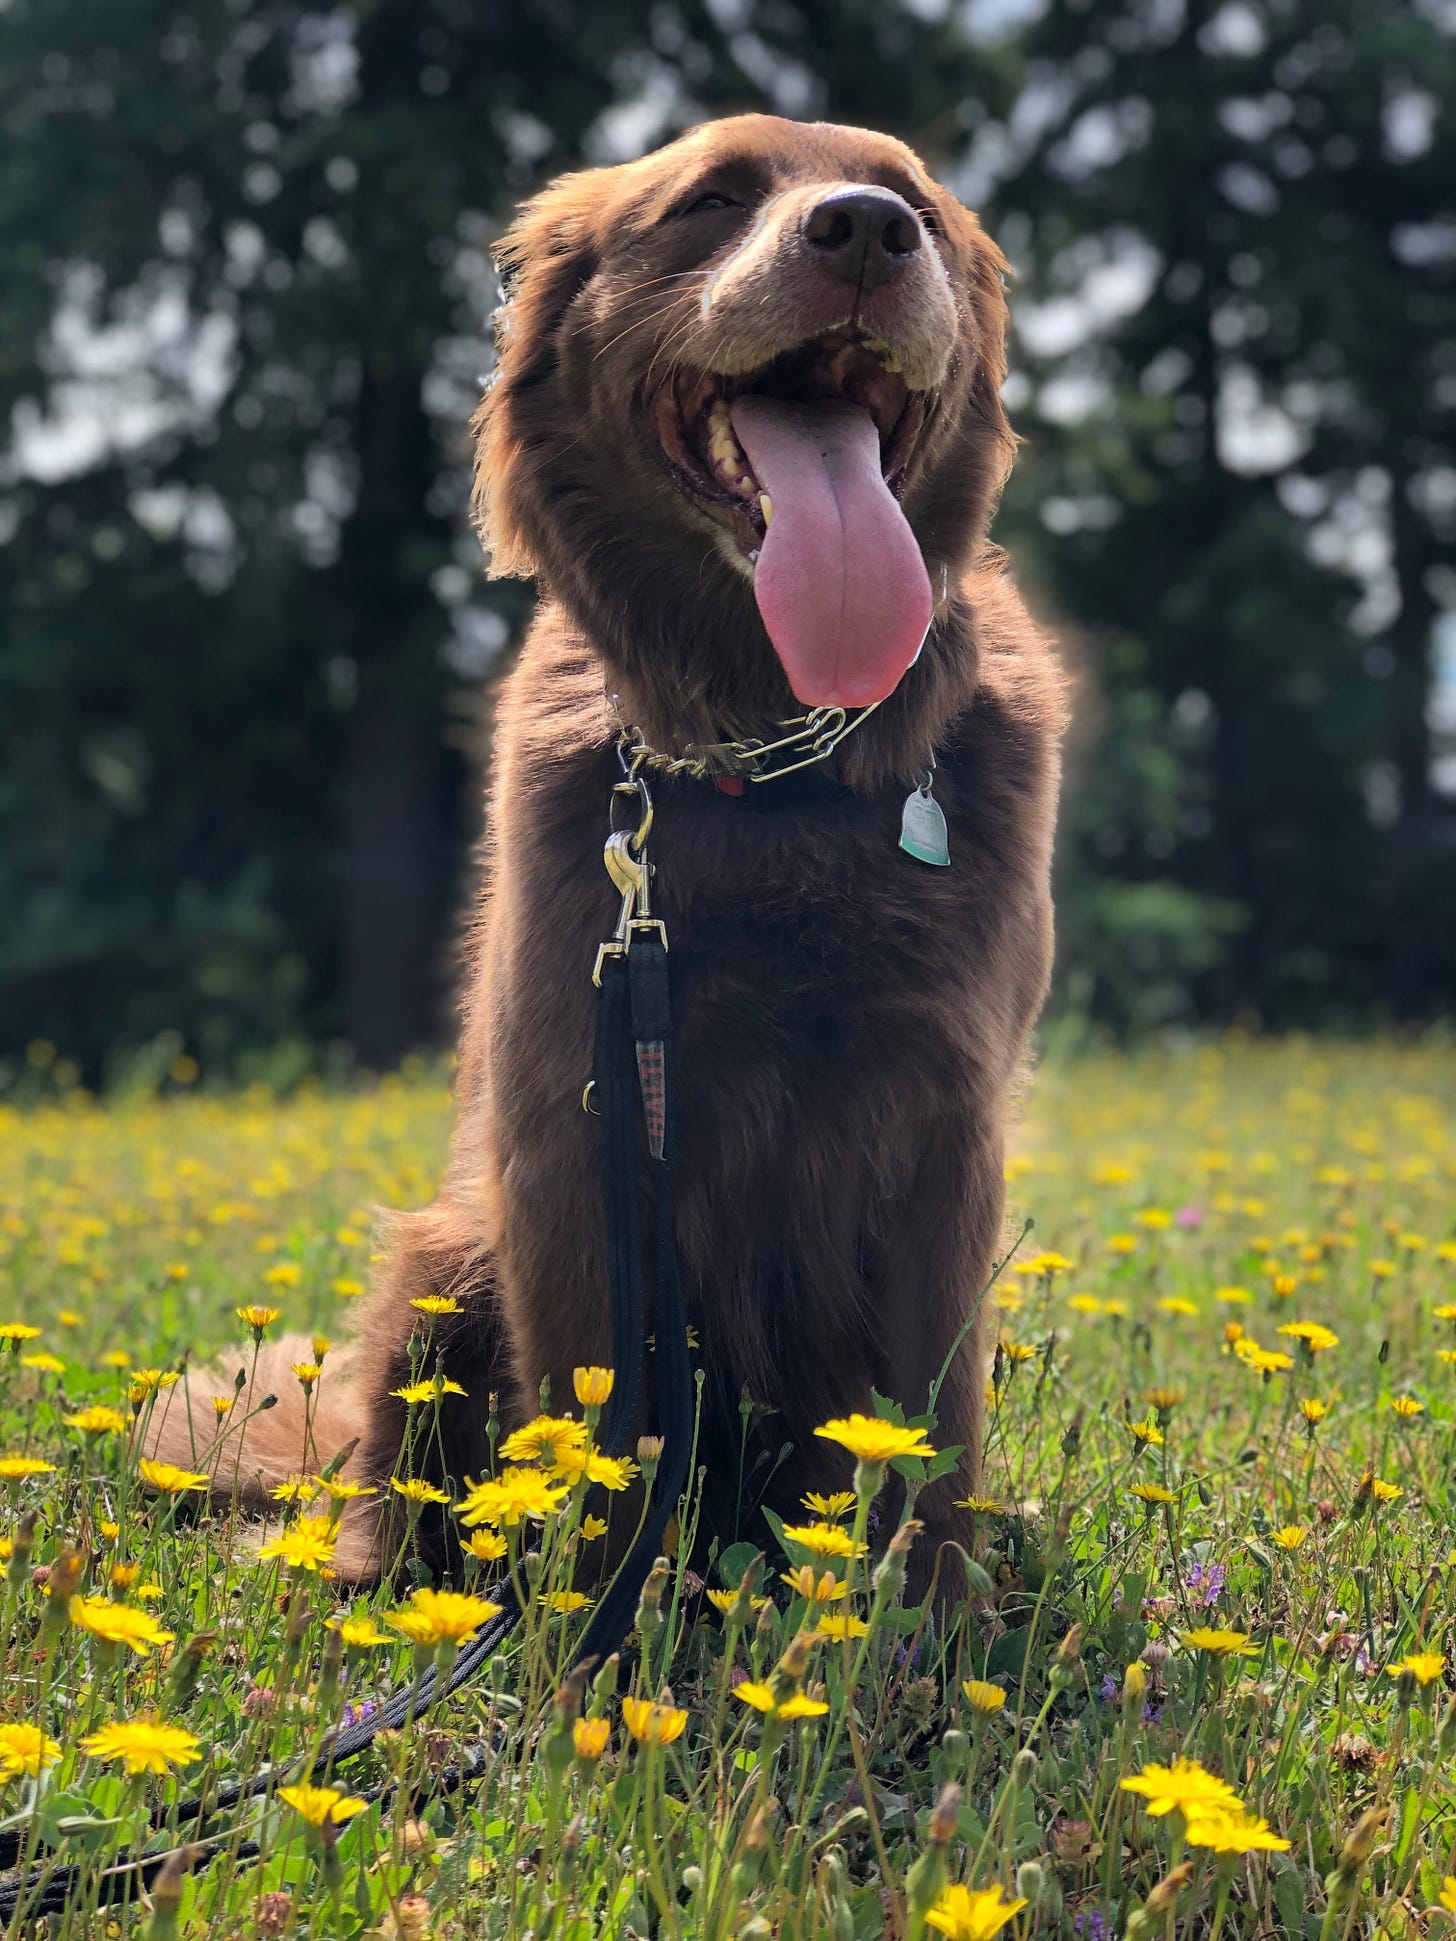 A big brown dog sits in the middle of a patch of dandelions, tongue out and smiling